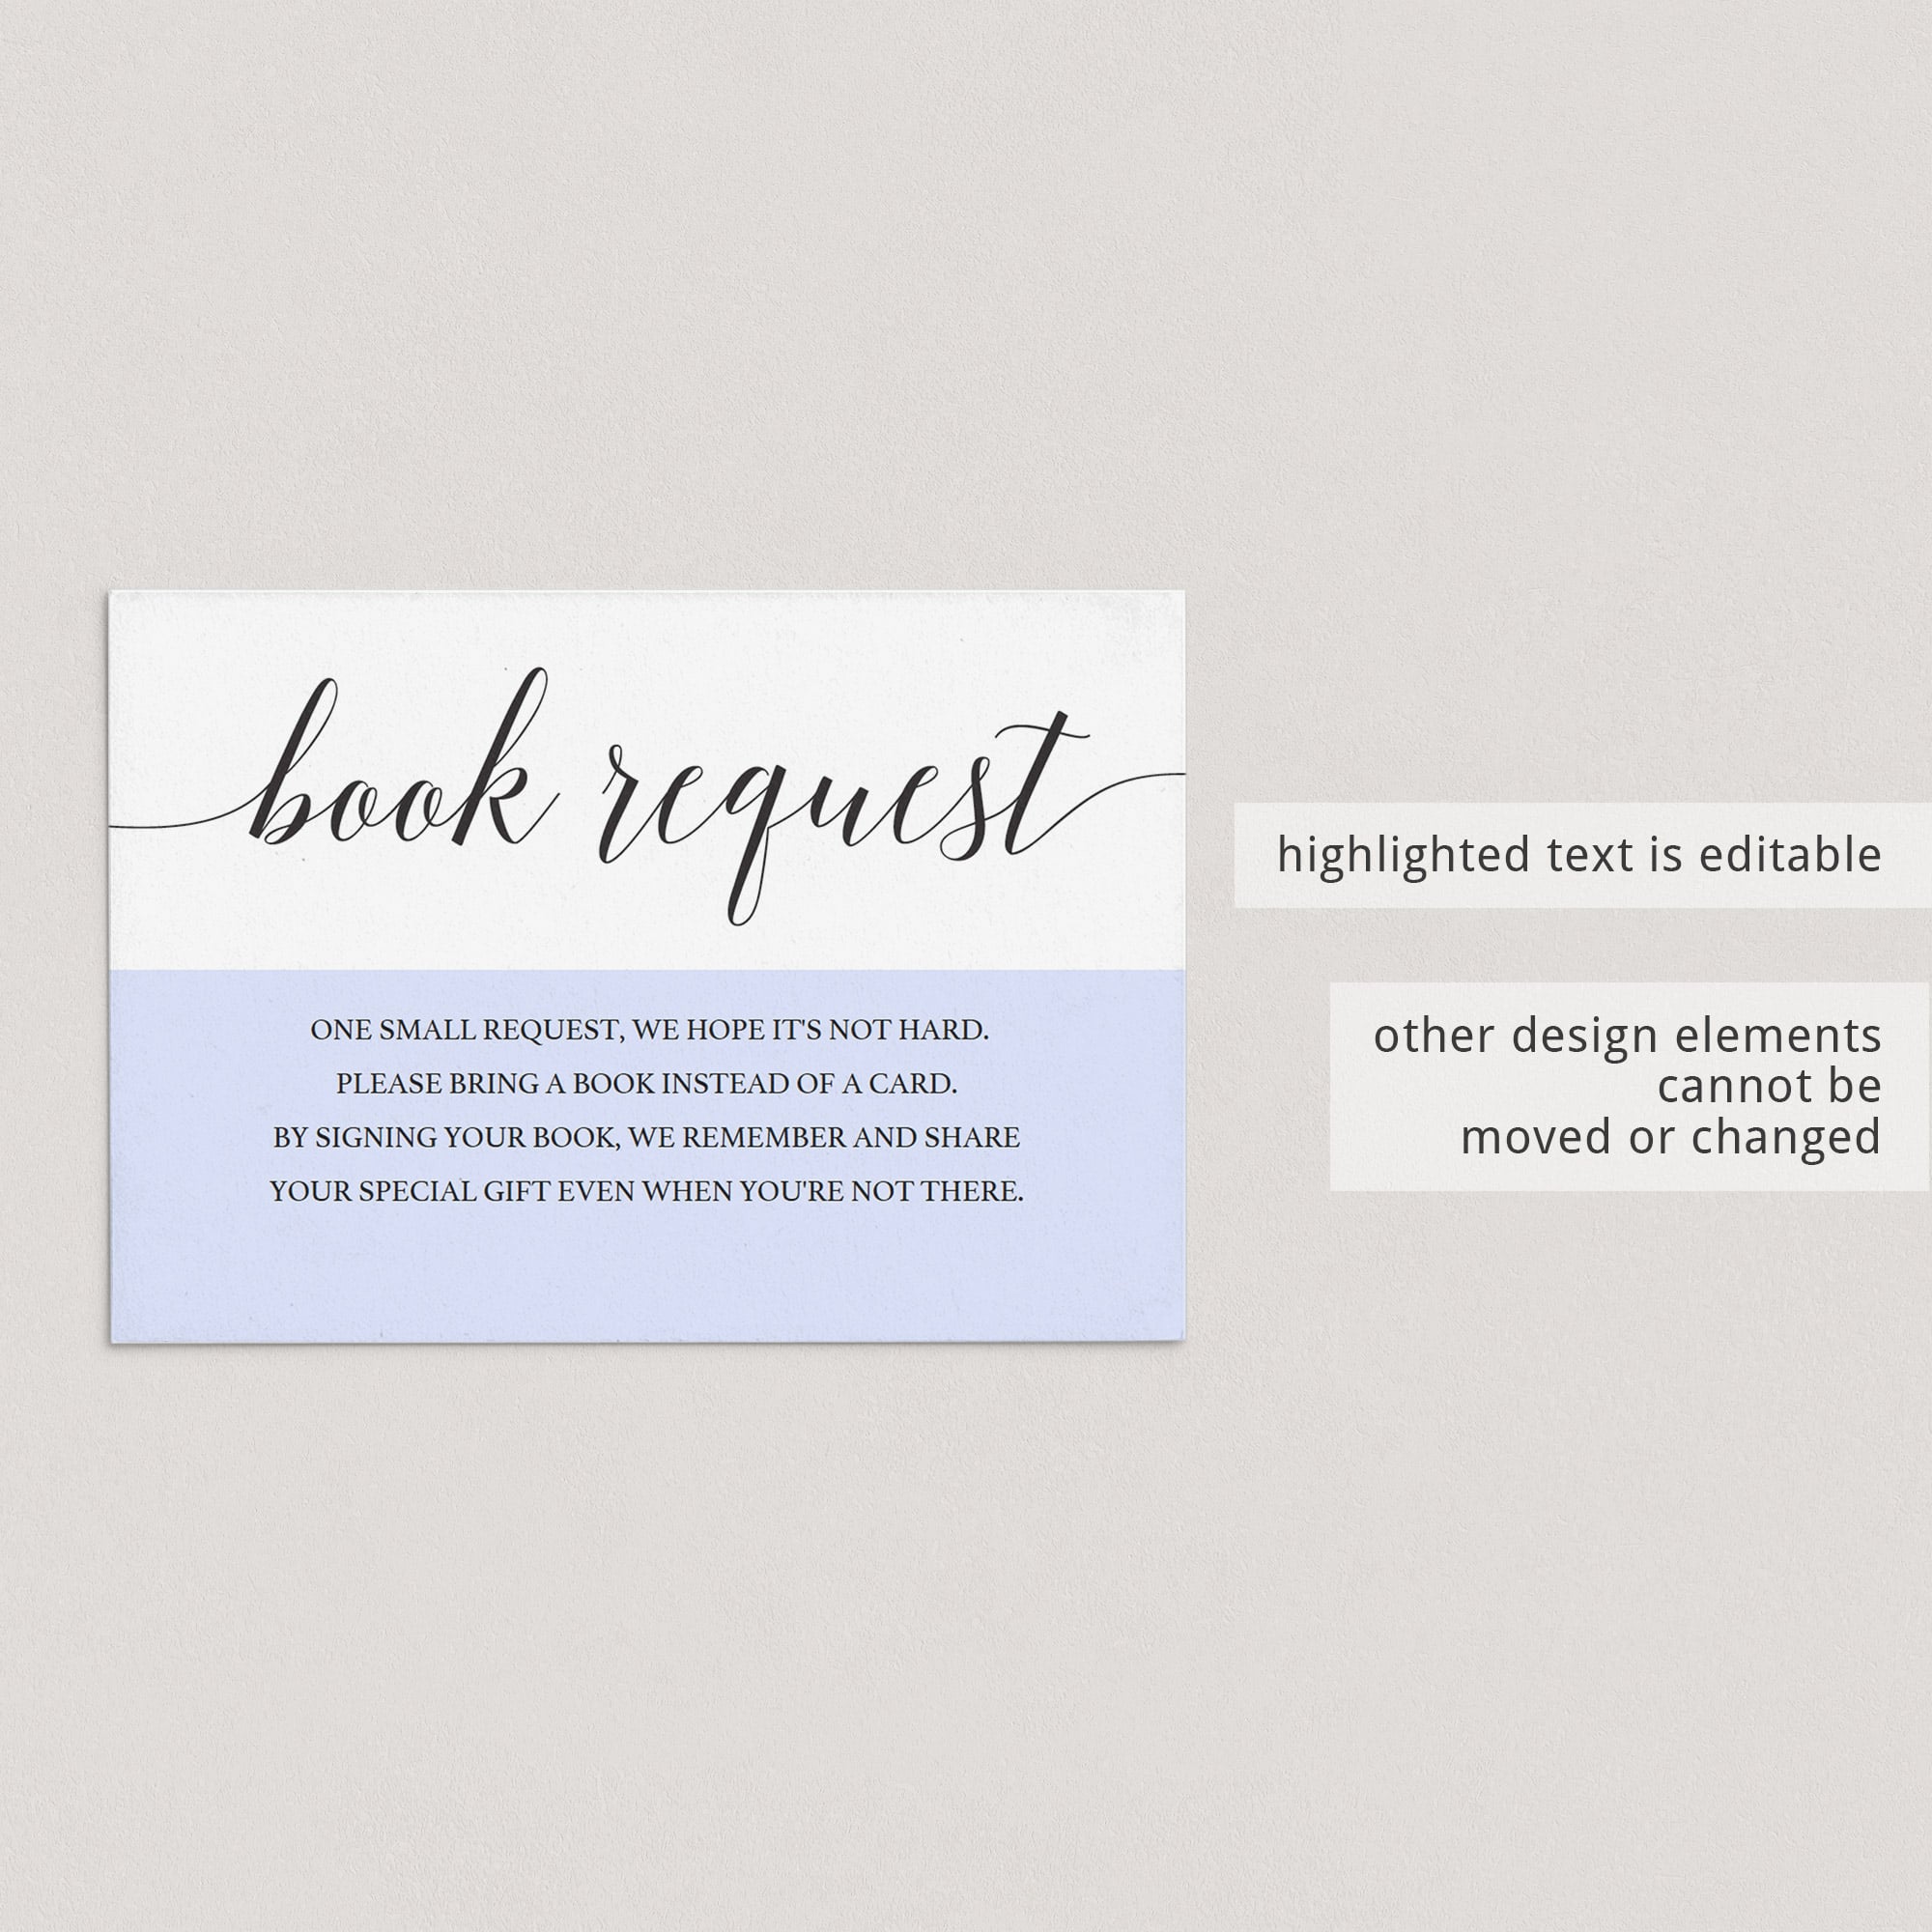 Simple book request card template by LittleSizzle